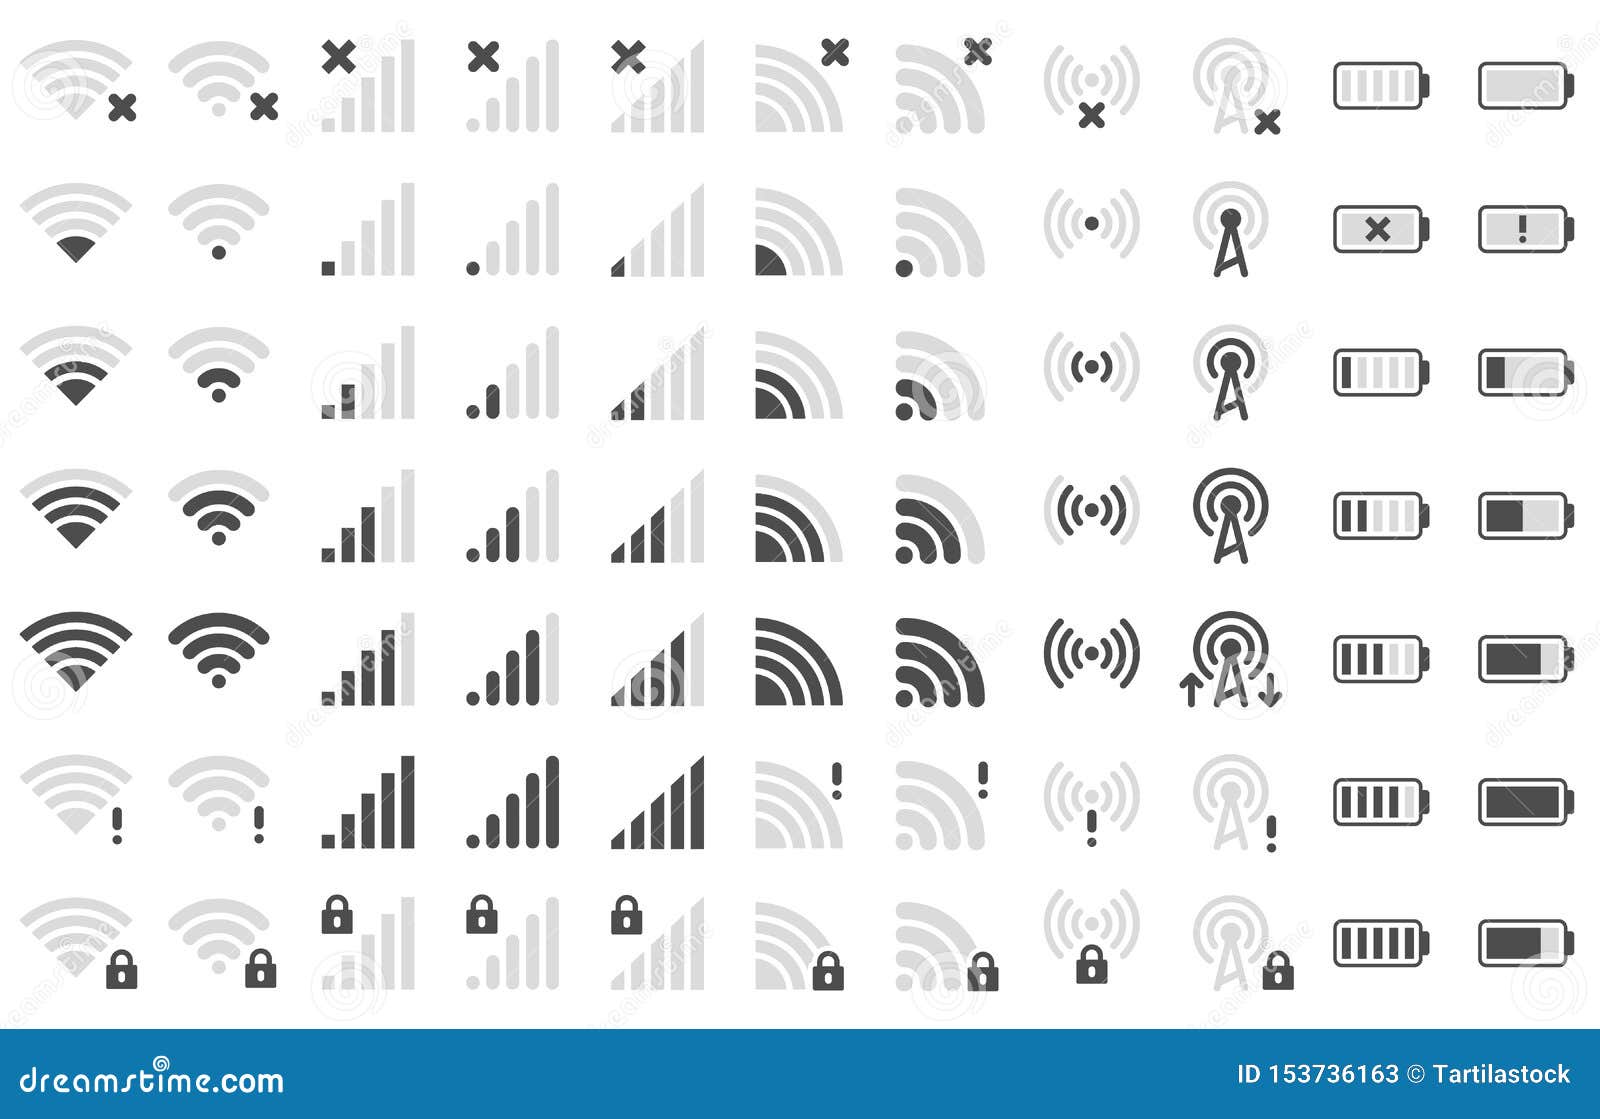 mobile phone bar icons. smartphone battery charge level, wifi signal strength icon and network connection levels